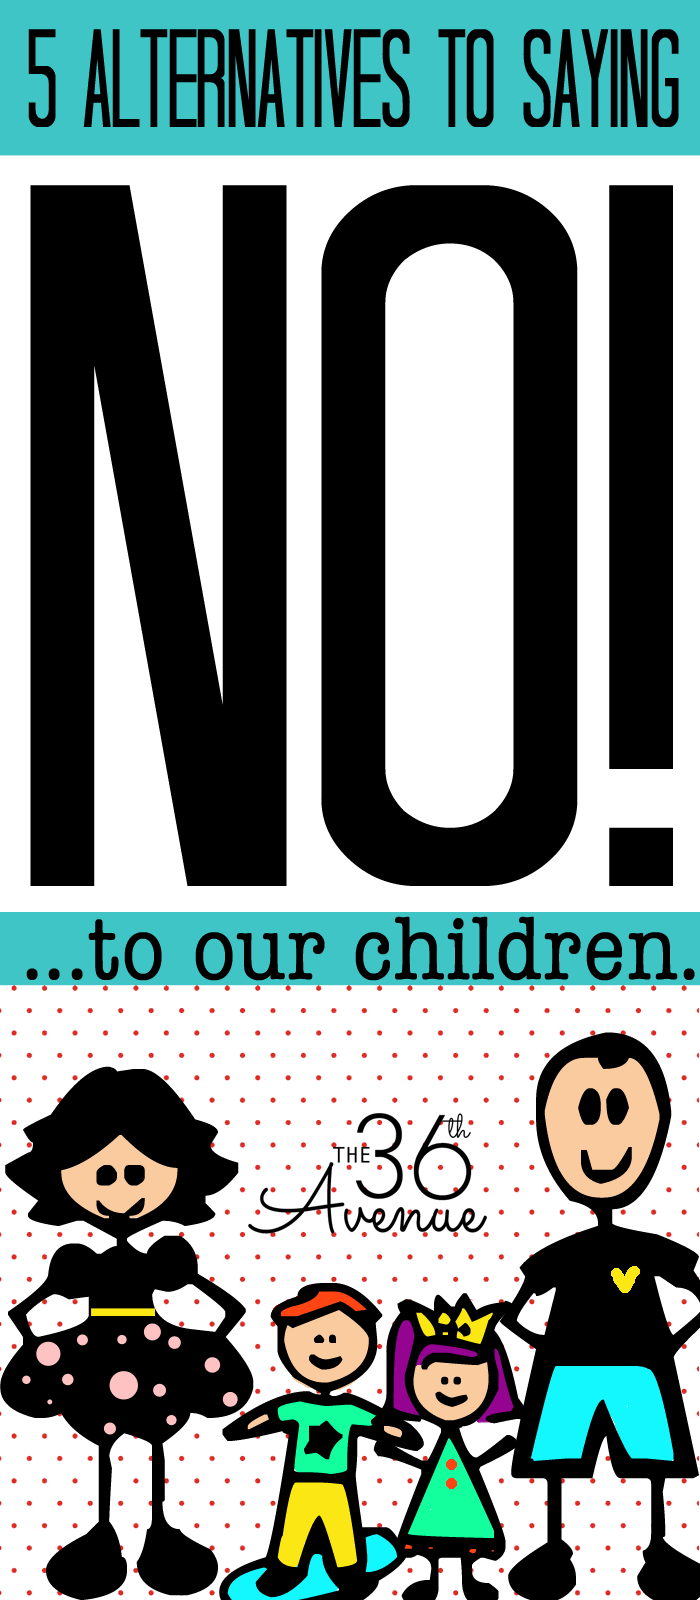 Parenting - Five Alternatives To Saying No to Our Children at the36thavenue.com #kids 